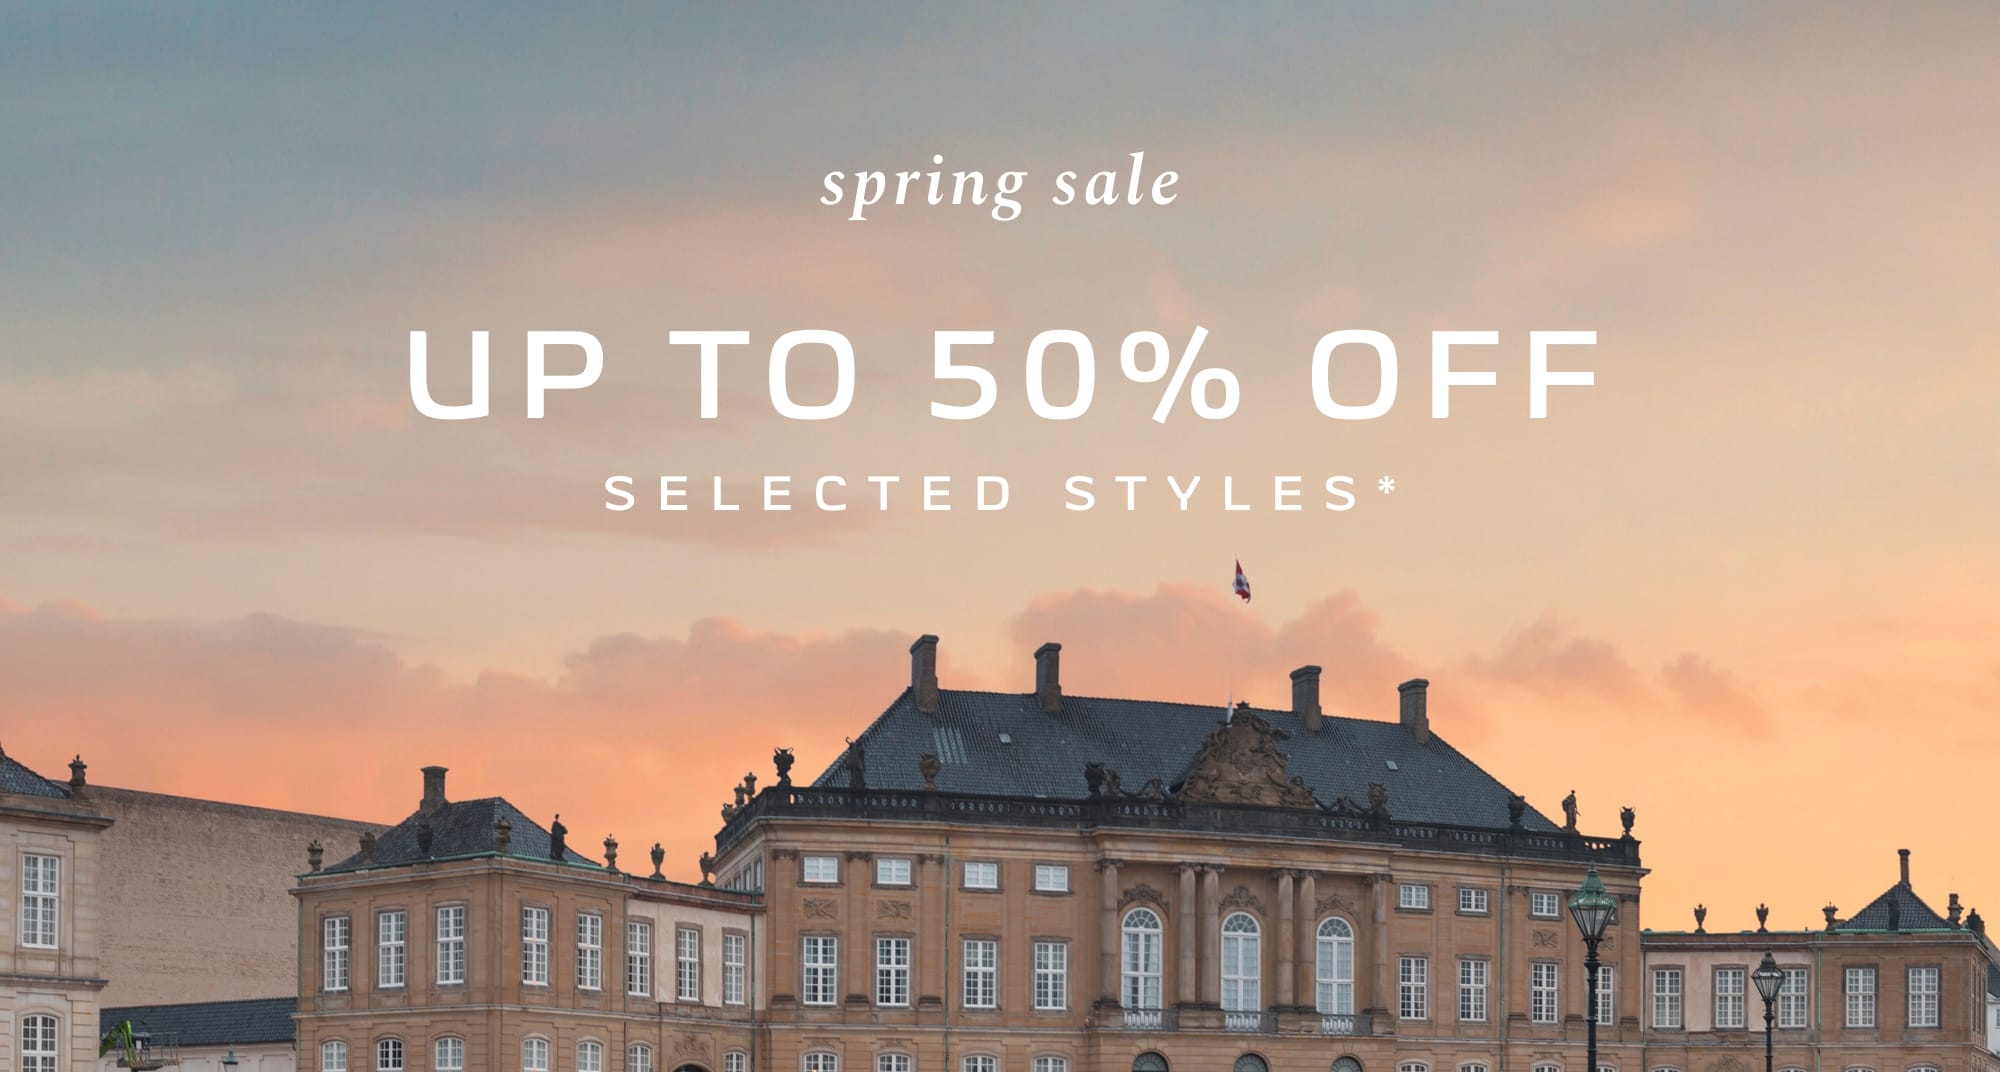 UP TO 50% OFF SELECTED STYLES*